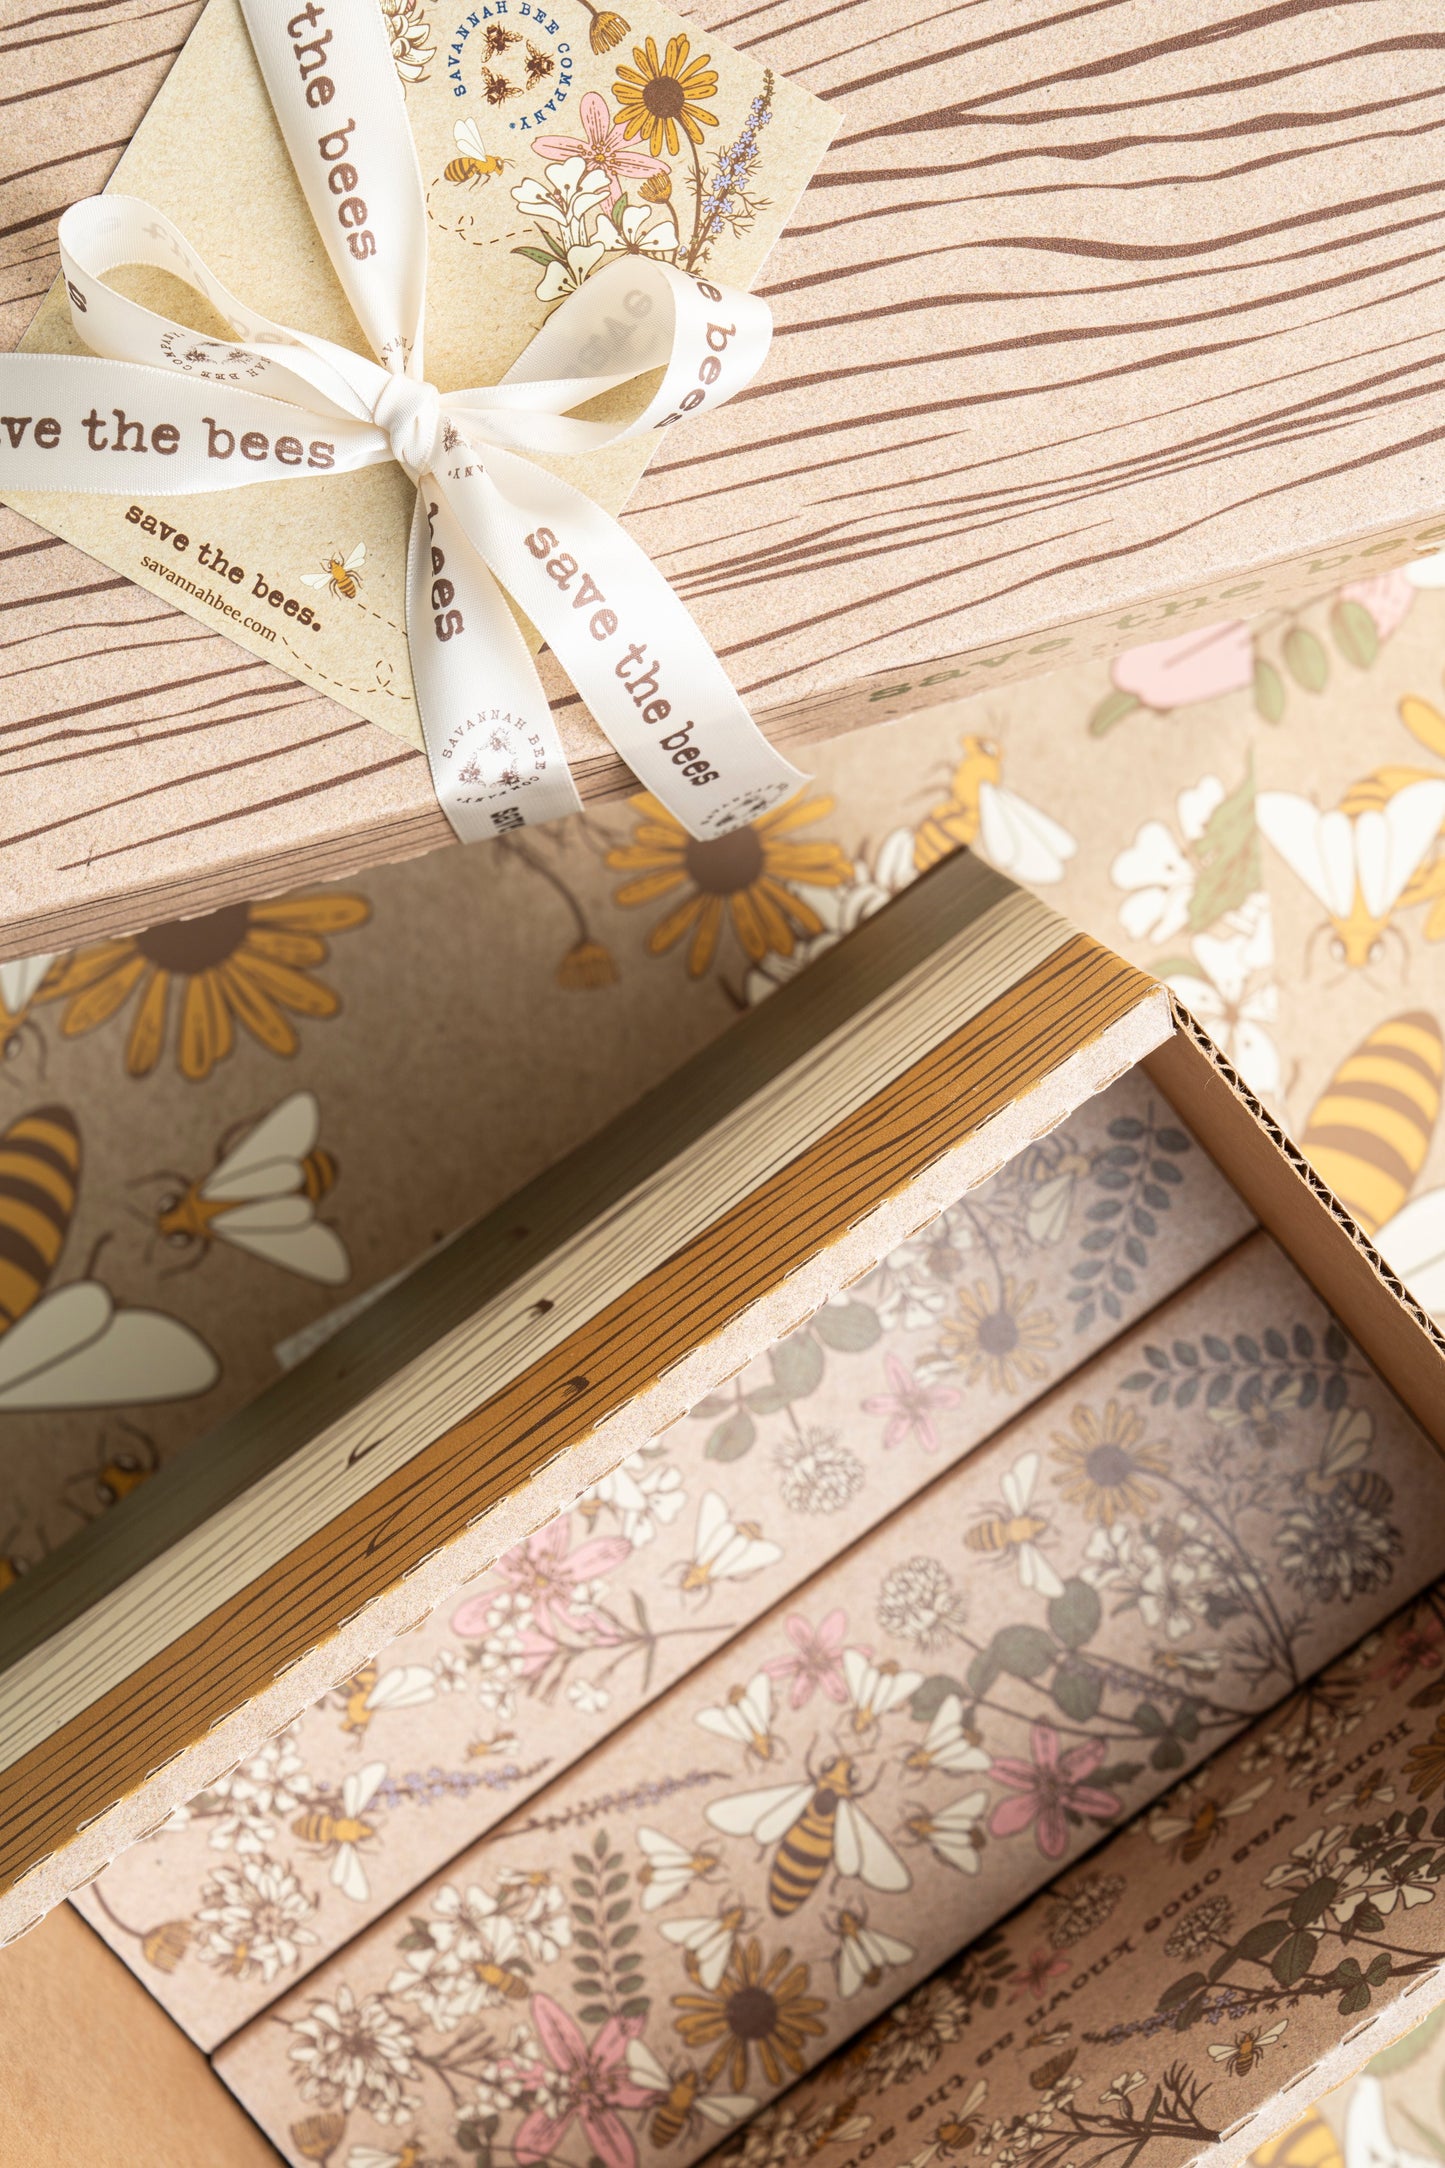 Save the bees gift box open with ribbon